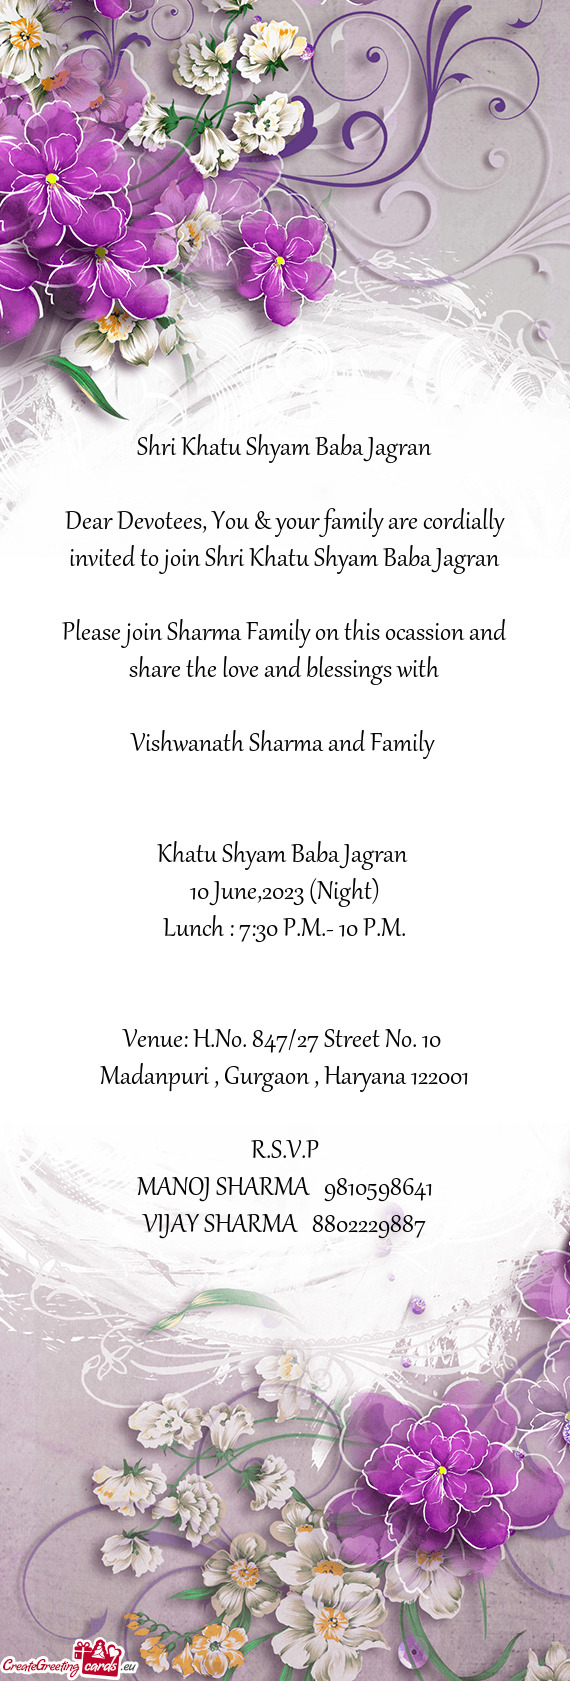 Please join Sharma Family on this ocassion and share the love and blessings with